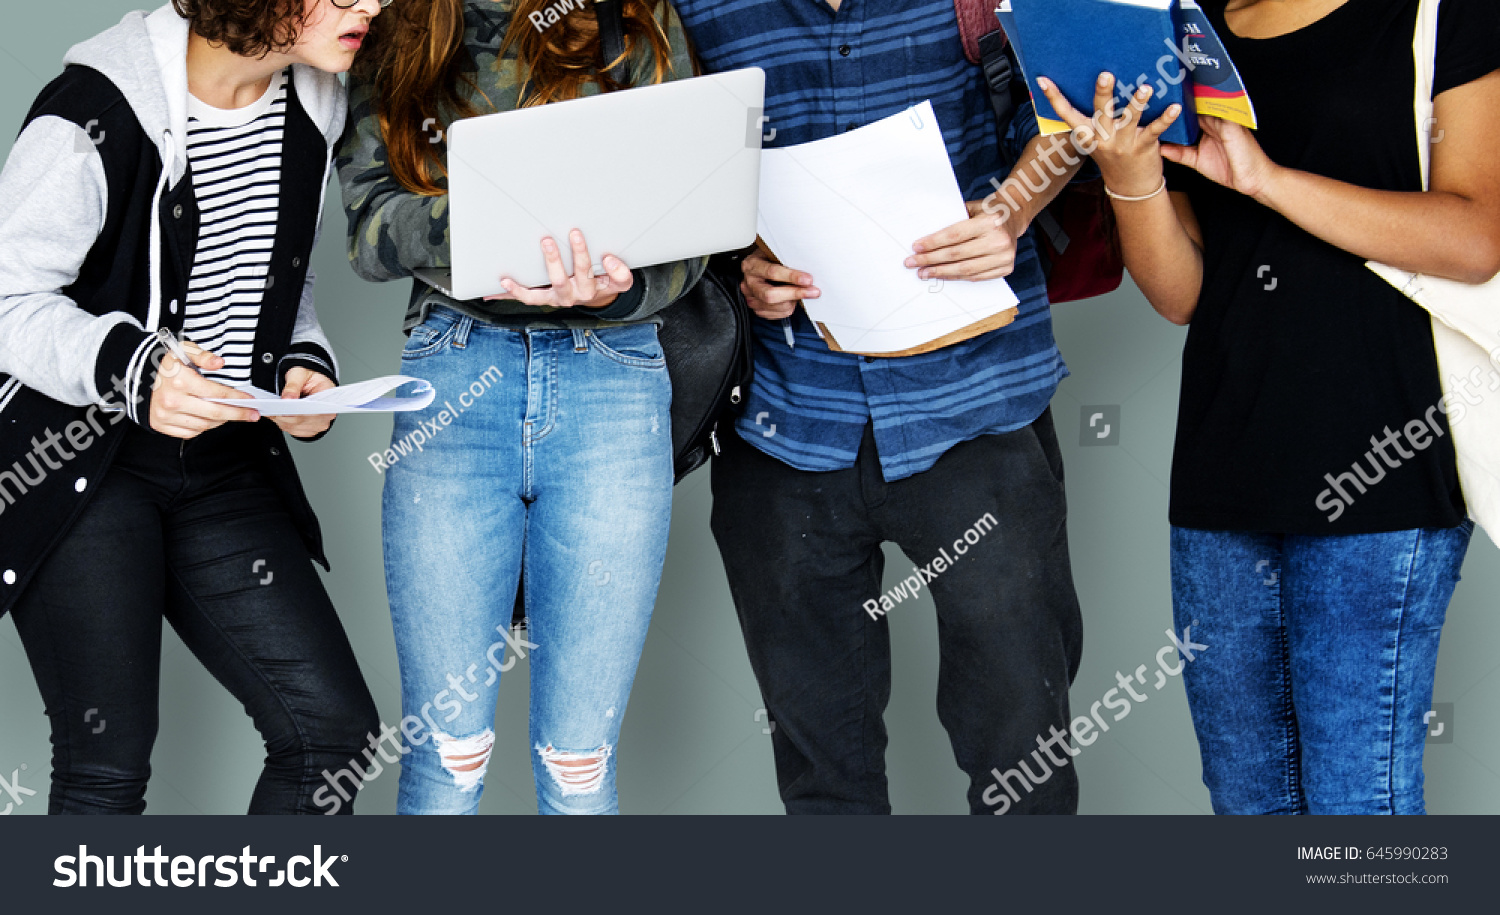 Group of Diverse High School Students Using Digital Devices Studio Portrait #645990283